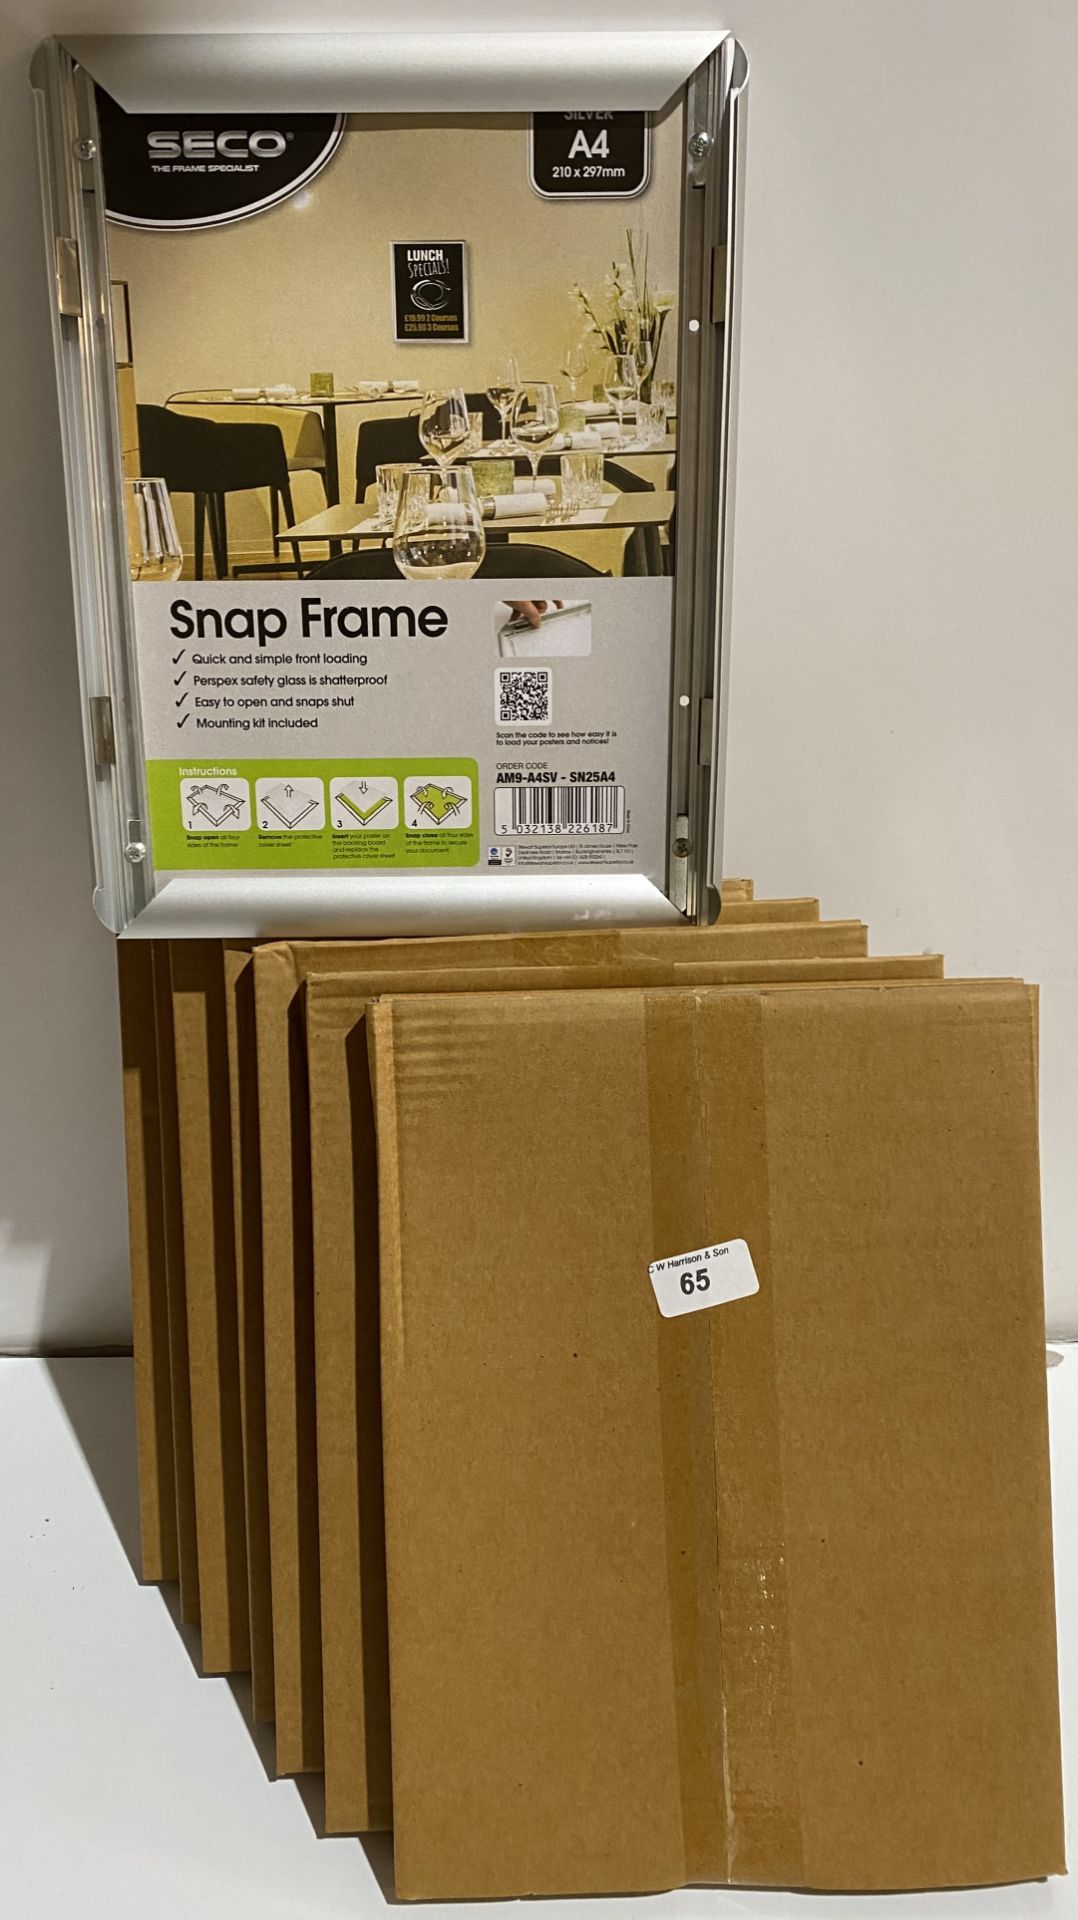 8 x new boxed Seco front load A4 silver aluminium frame snap frame point of sale poster picture